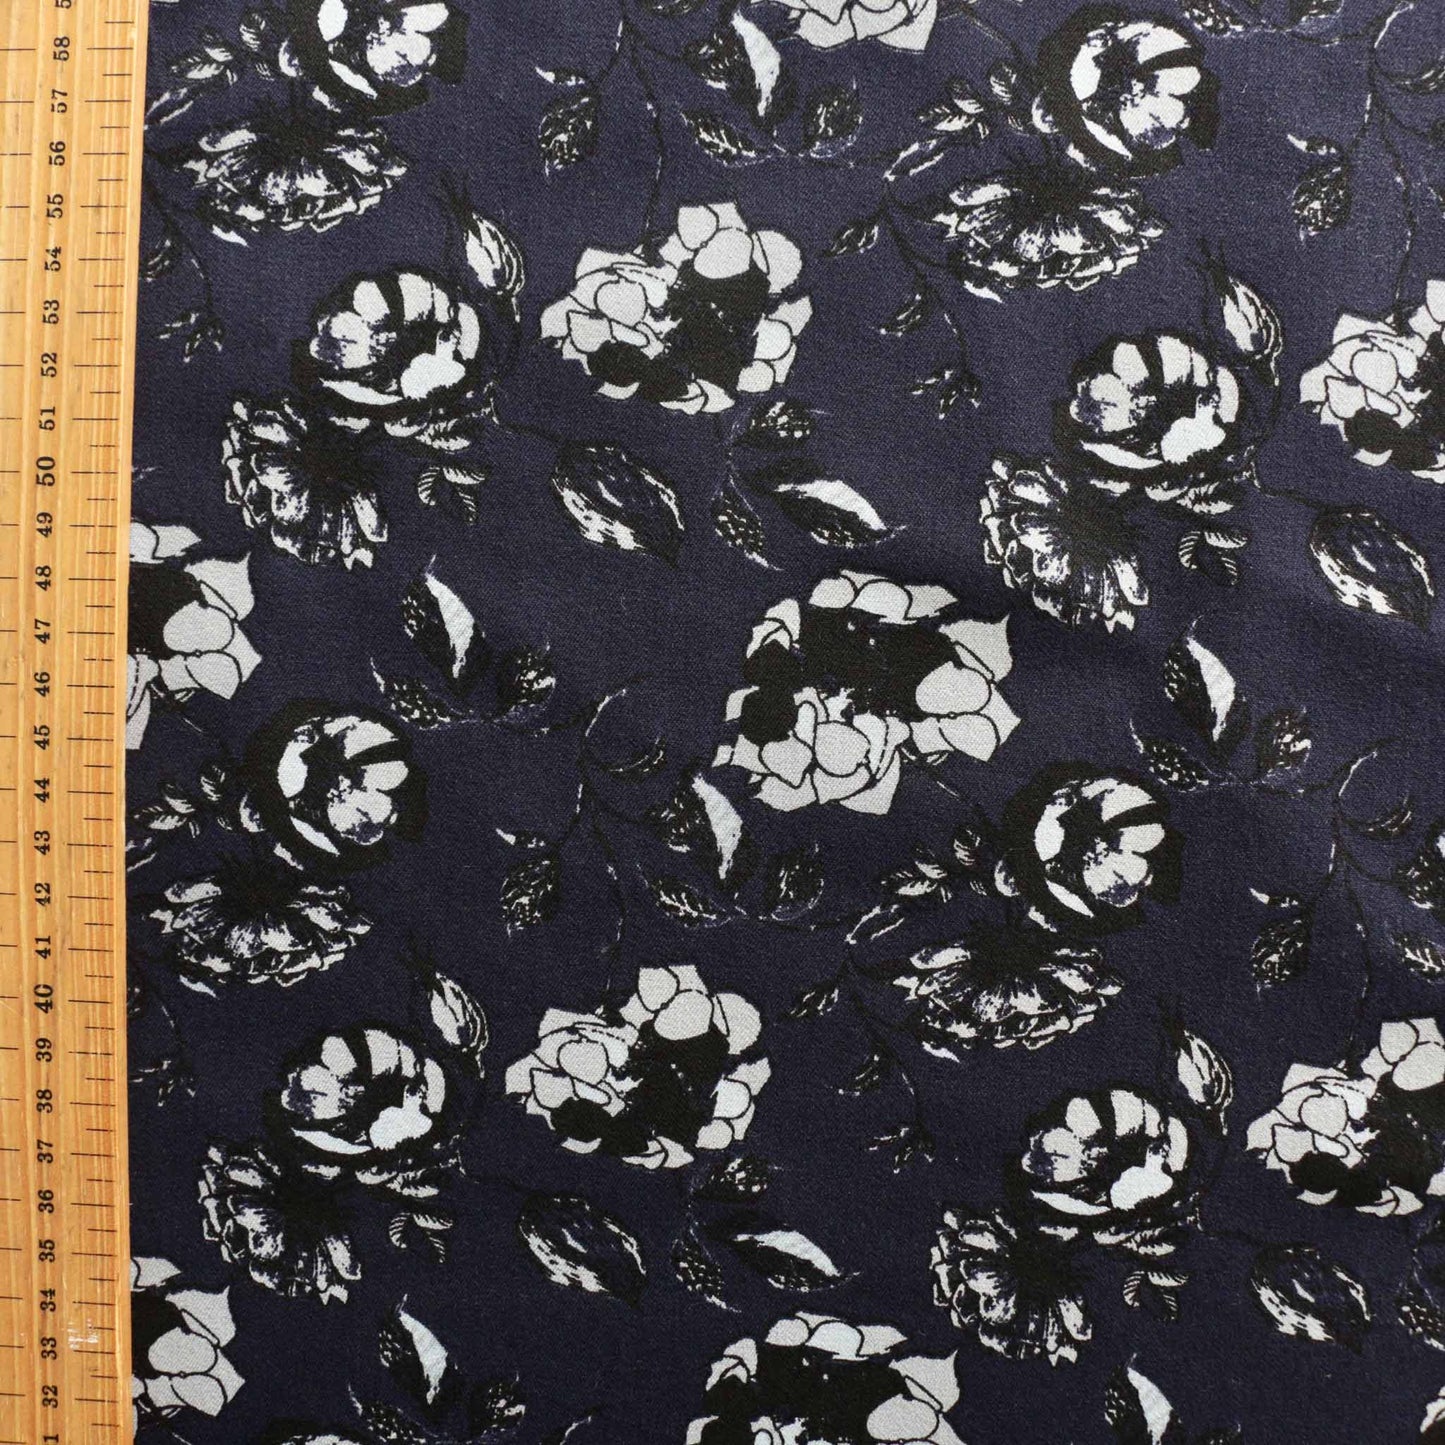 metre cotton sateen in navy blue fabric with floral white printed flowers